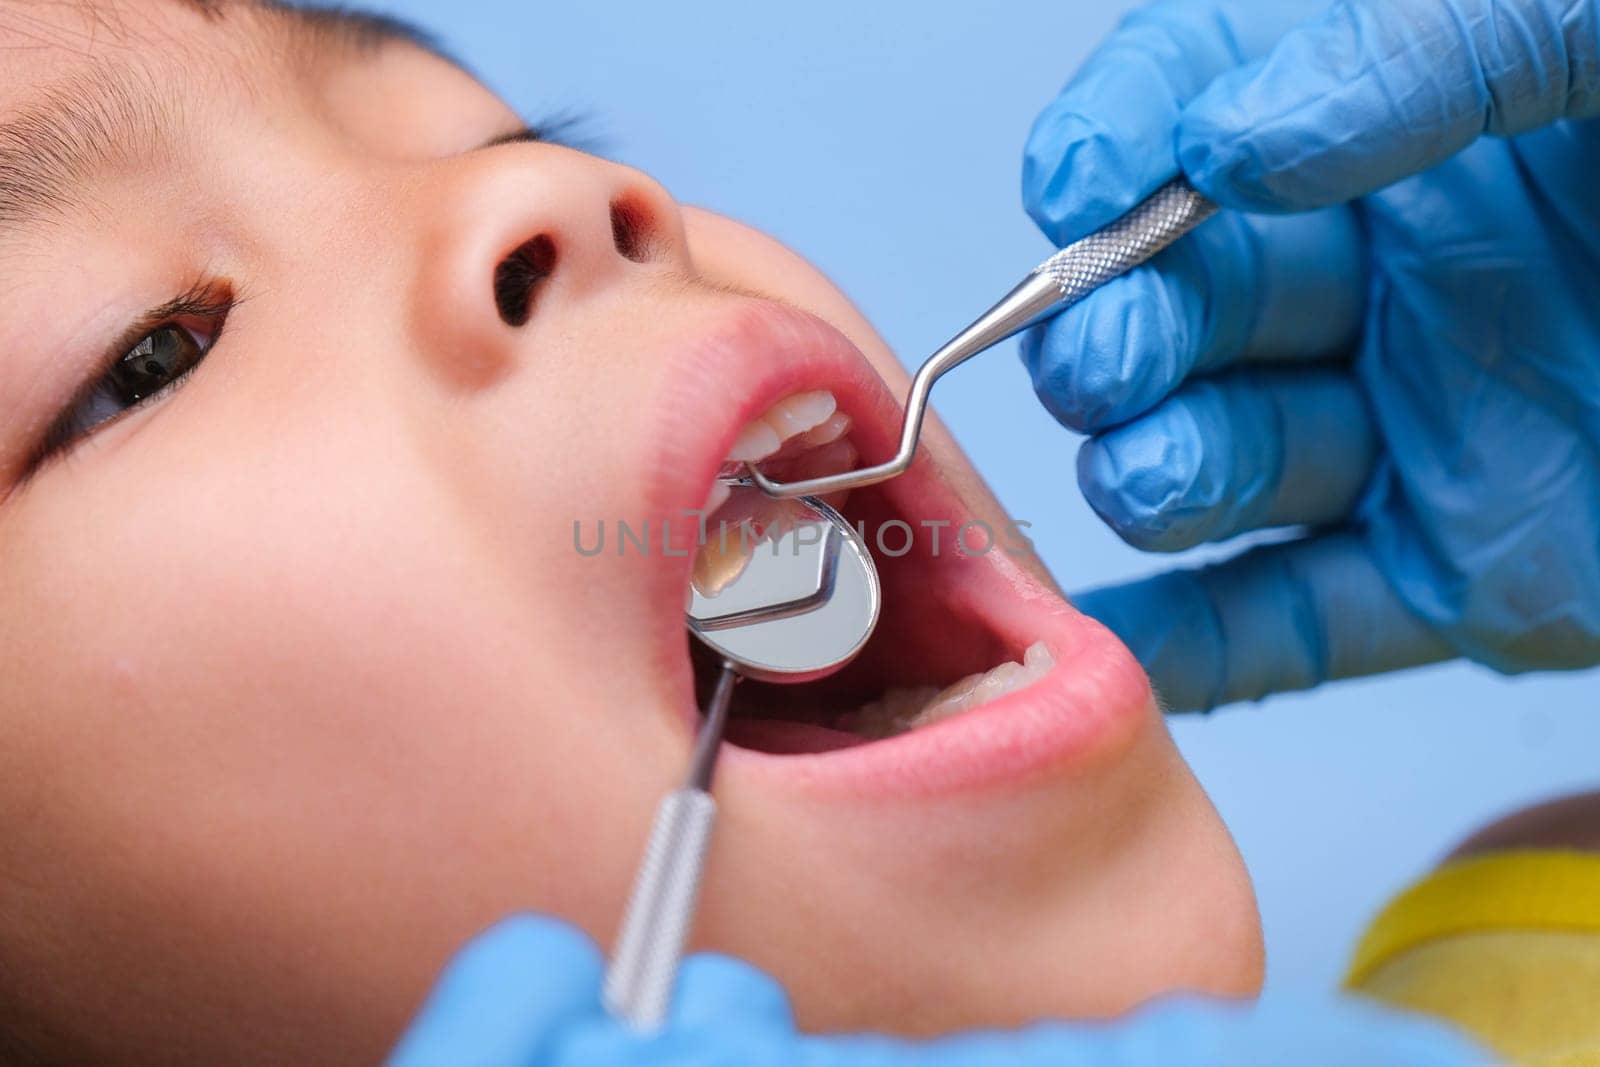 Close-up in the oral cavity of a healthy child with beautiful white teeth. Young girl opens her mouth to reveal healthy teeth, hard and soft palate. Dental and oral health check by TEERASAK